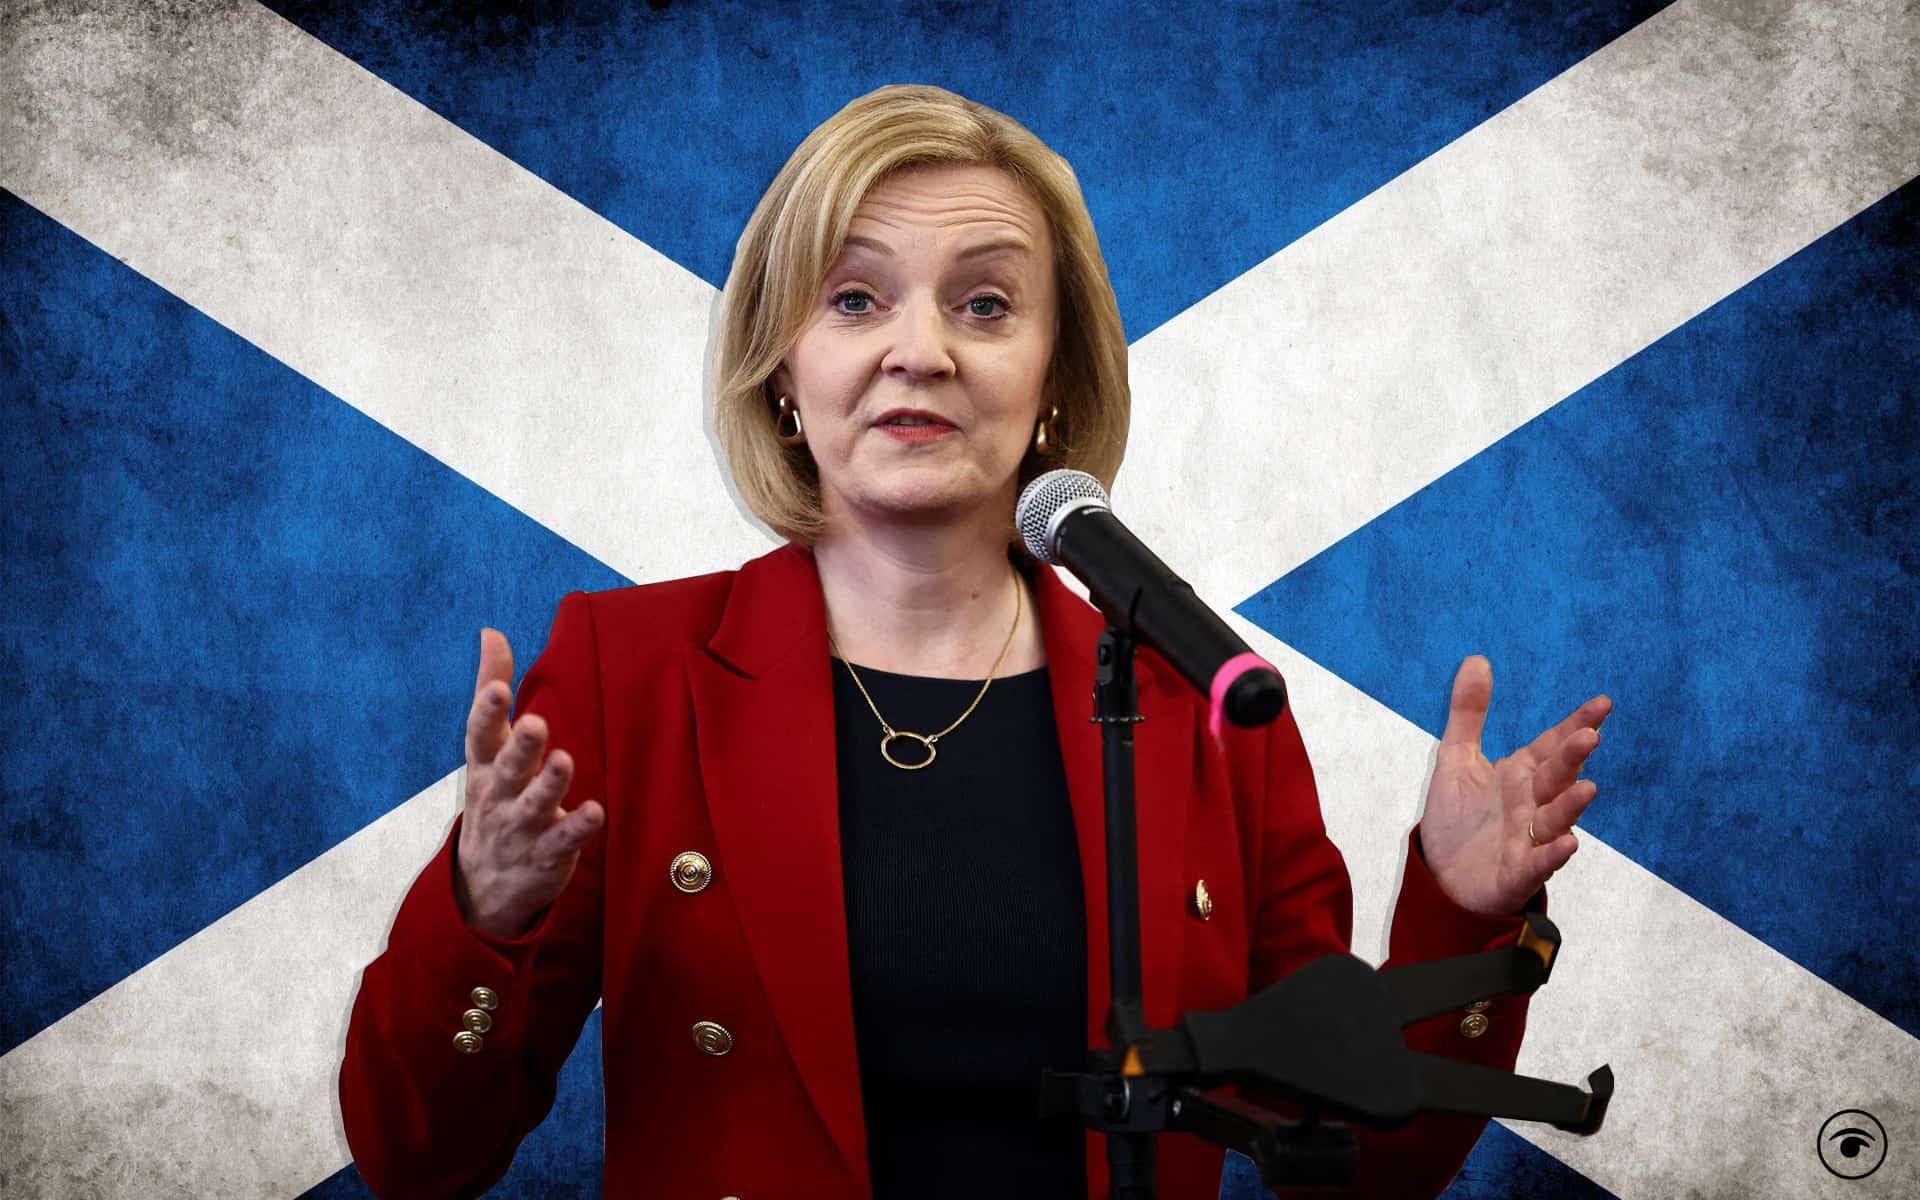 Liz Truss’s insults shows how little the Conservatives care about Scotland